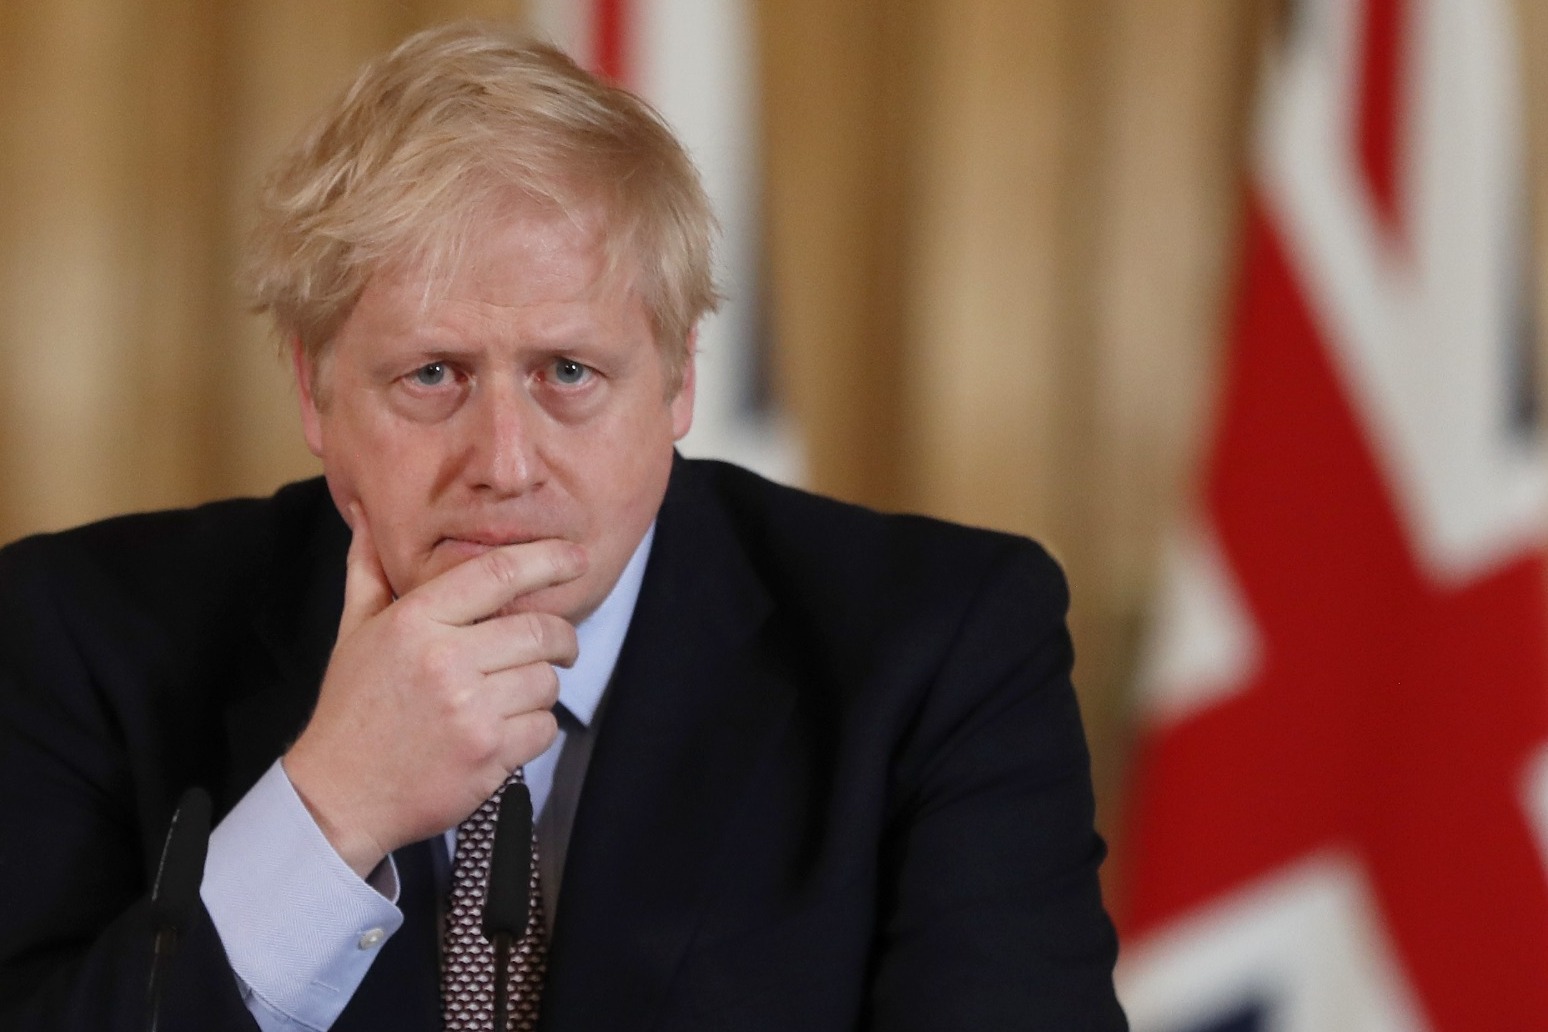 Boris Johnson: Career that defied political gravity ends with spectacular fall 